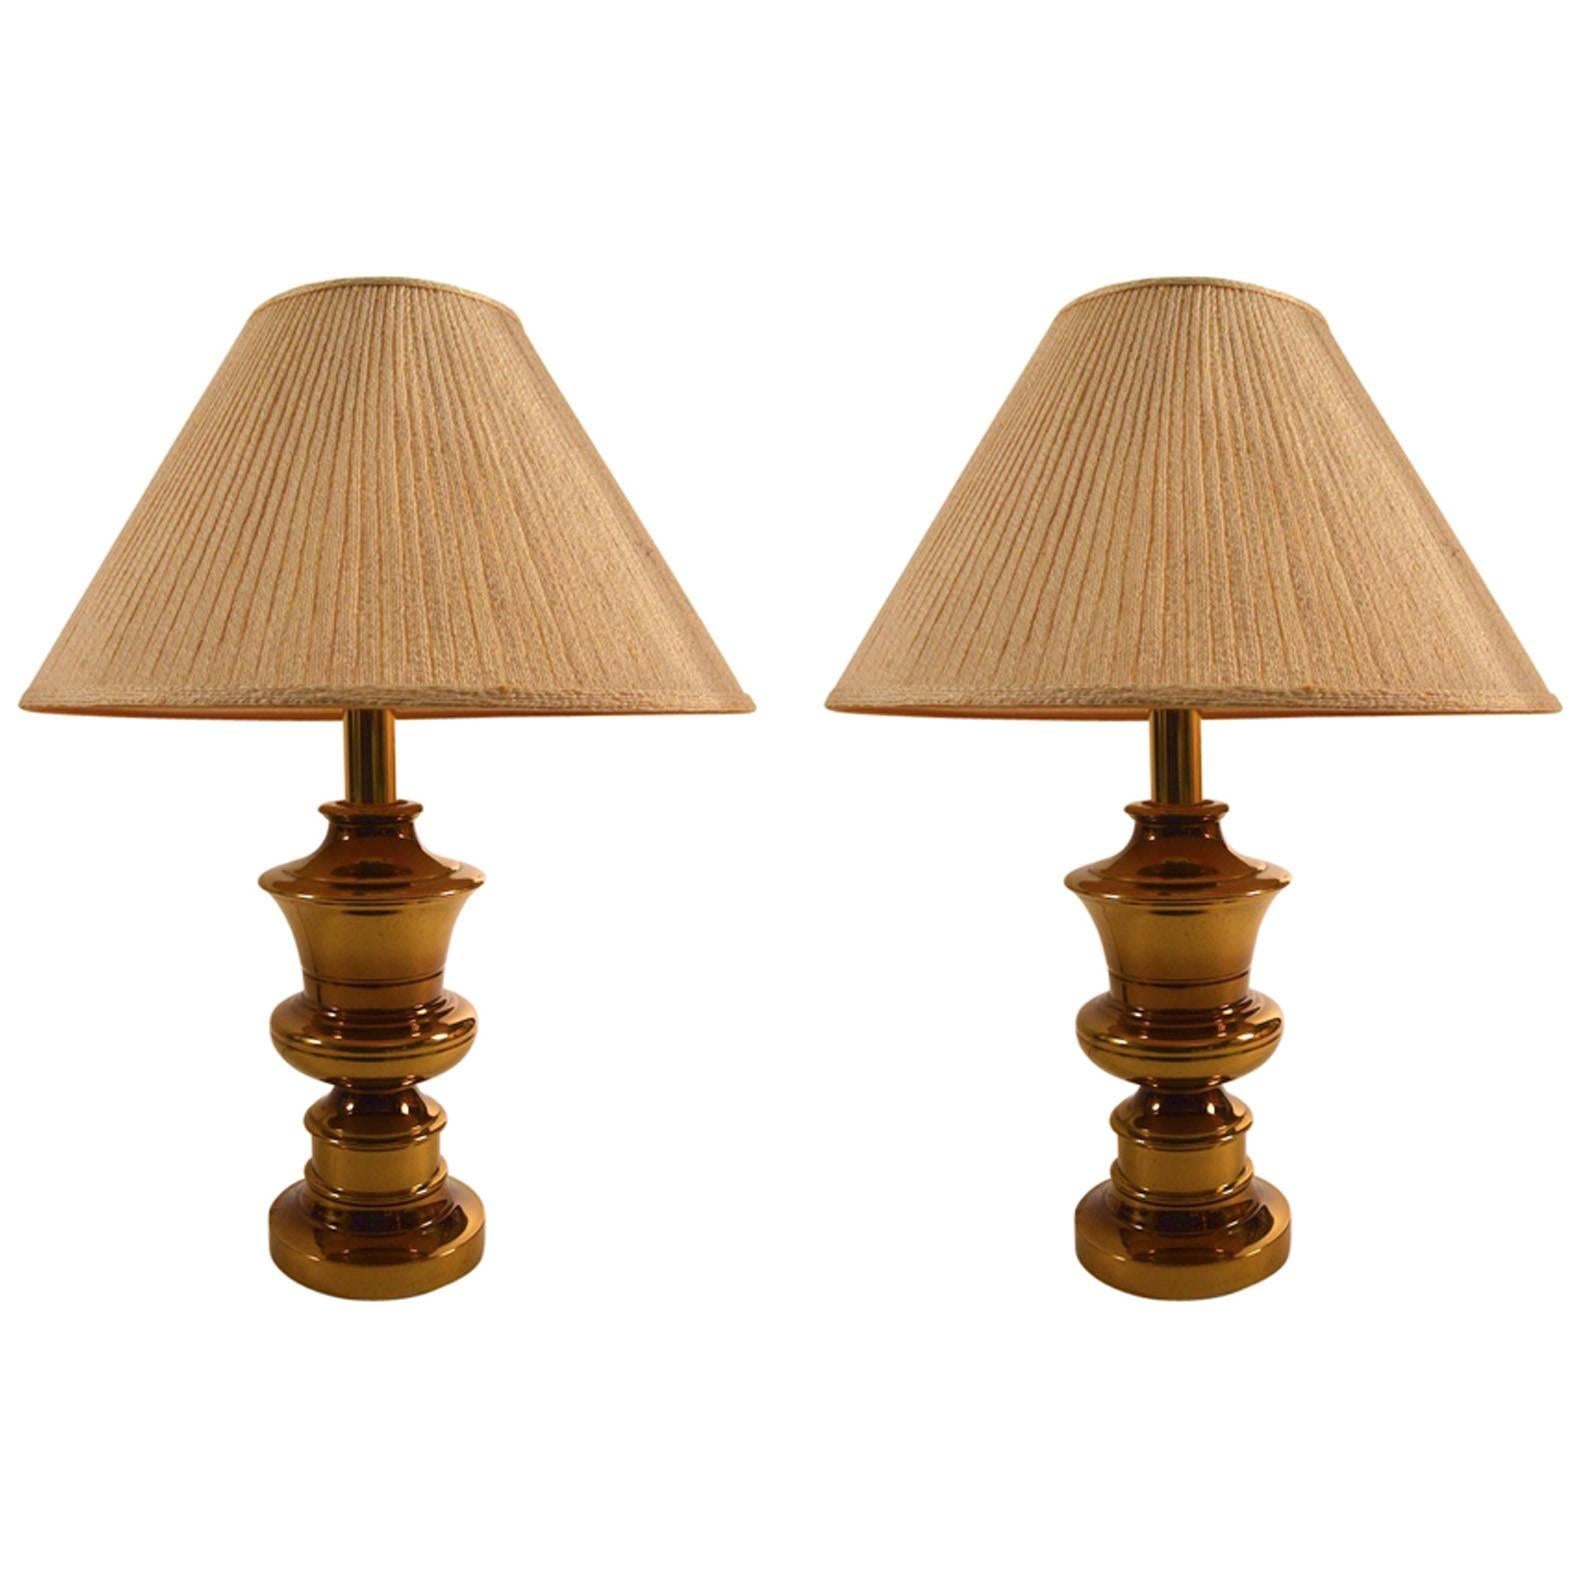 Pair of Lamps by Westwood